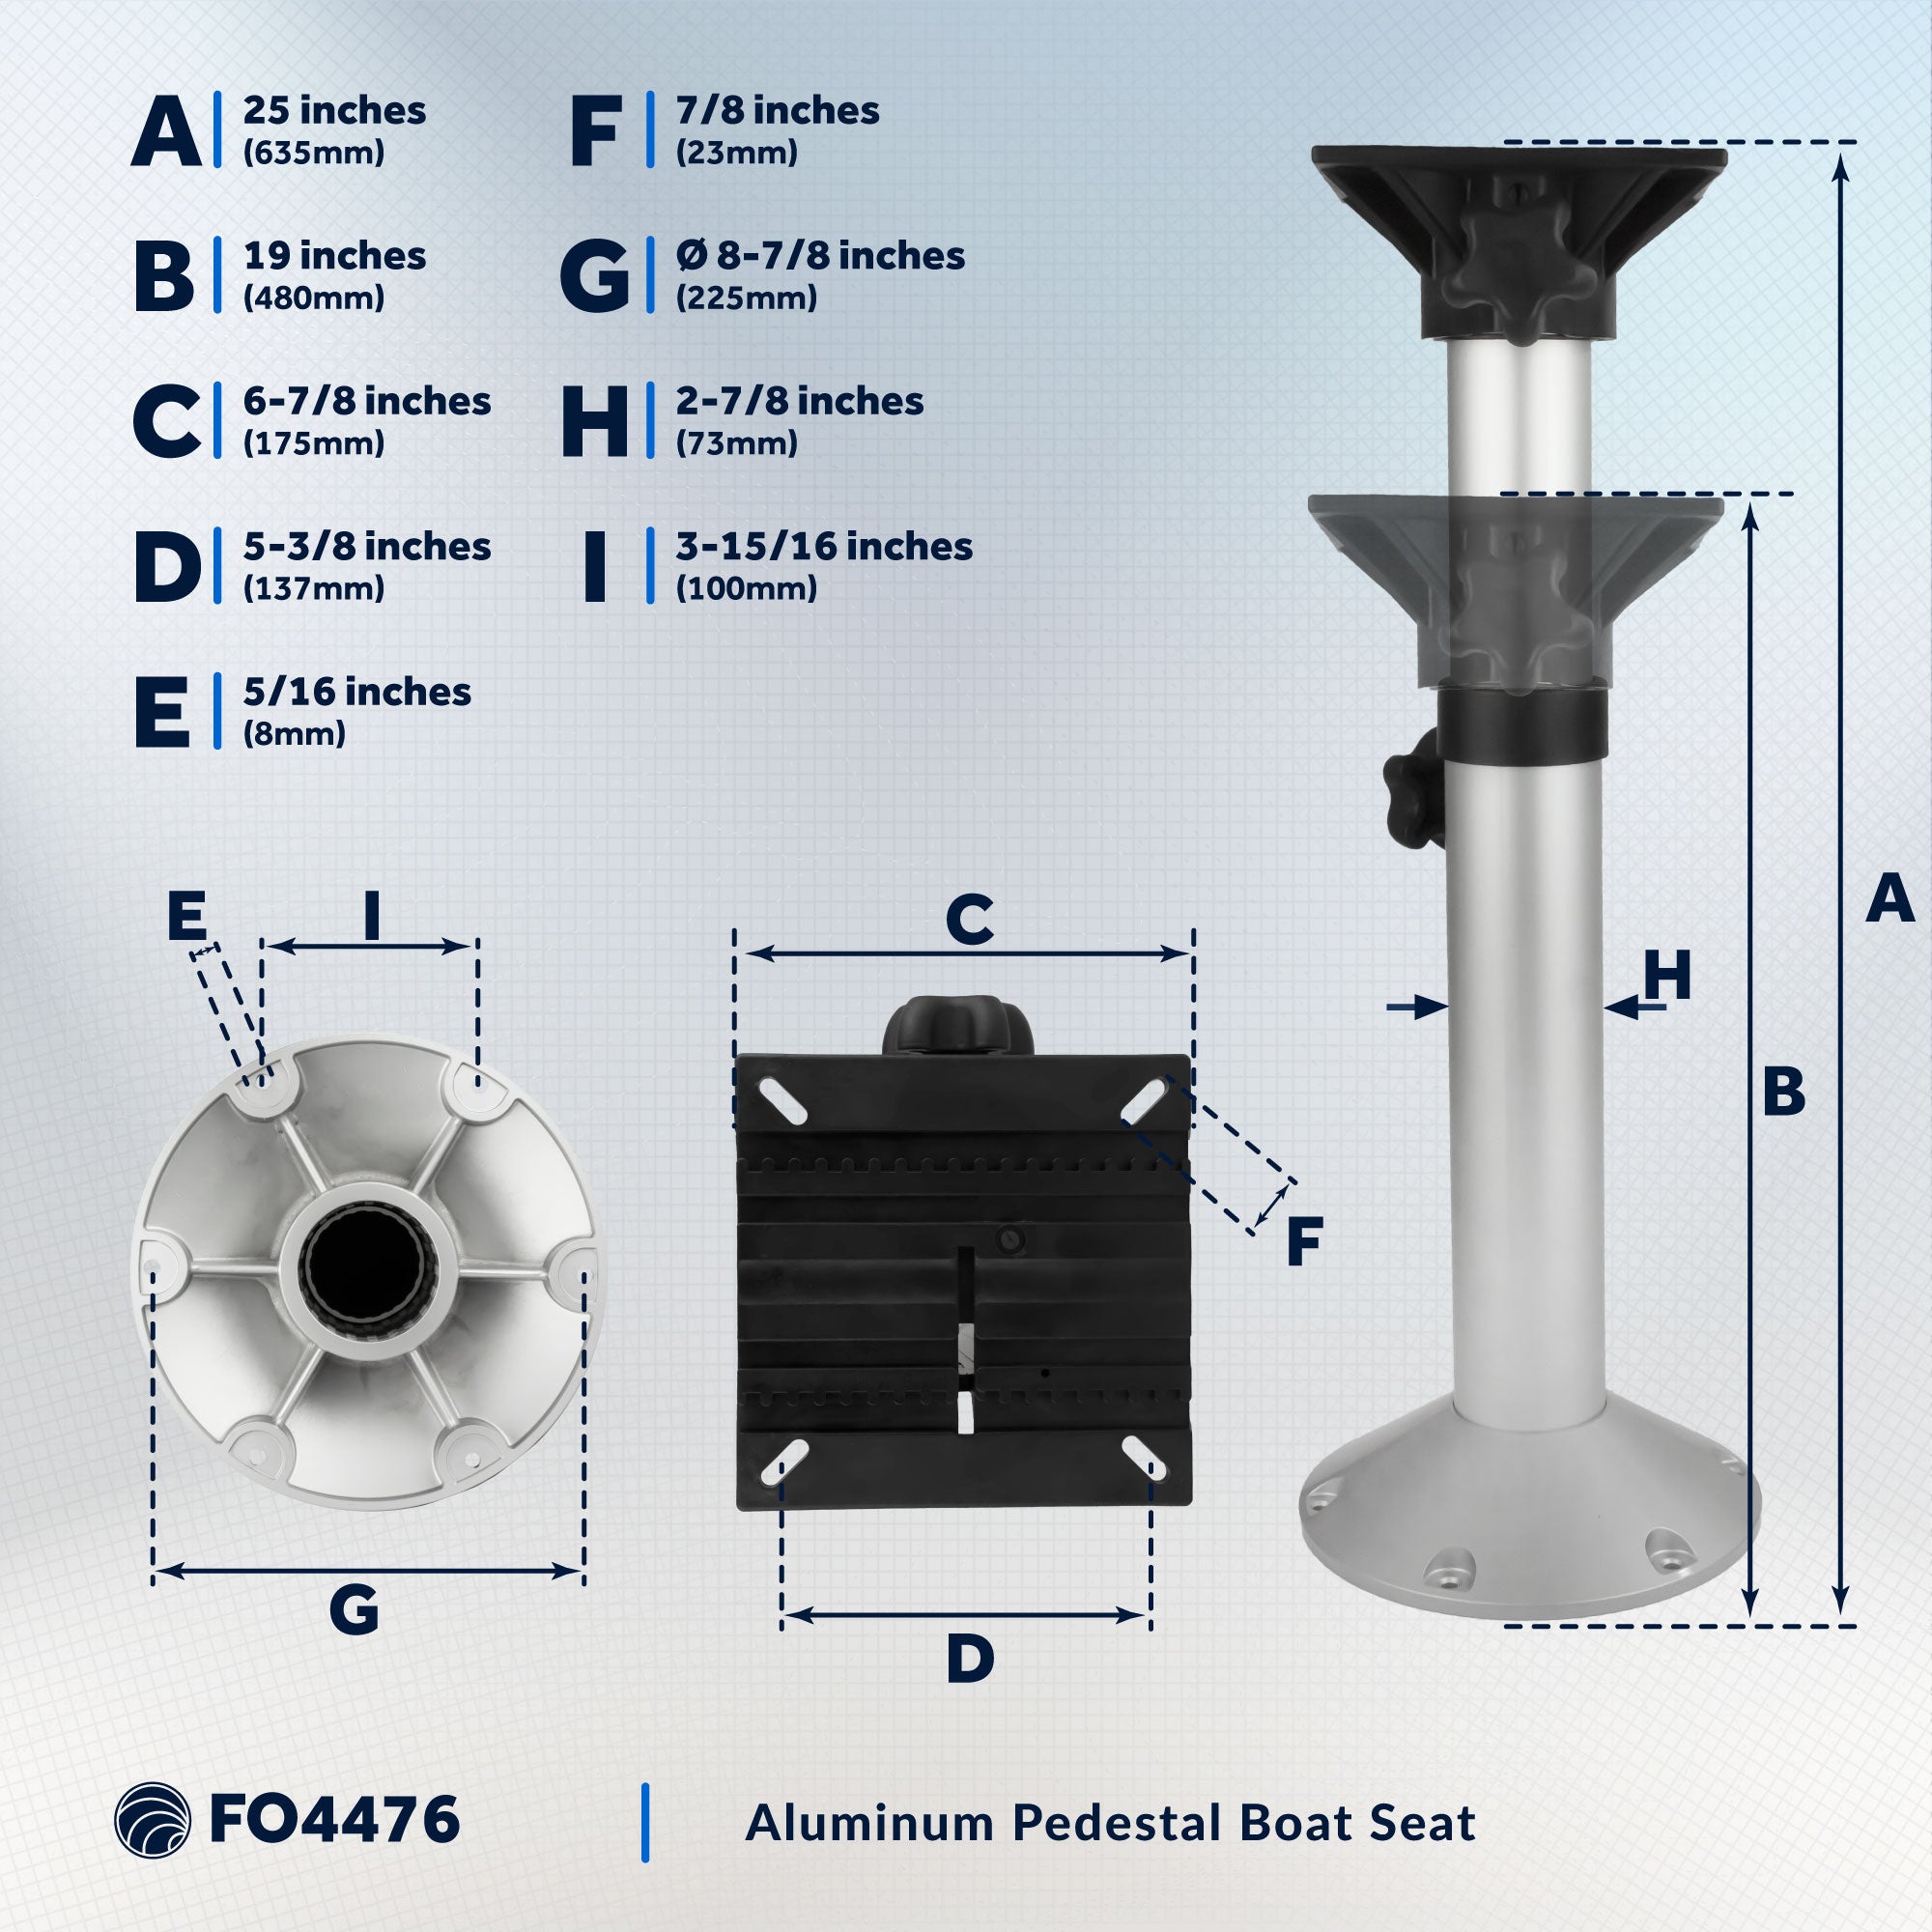 Boat Seat Pedestals, Adjustable from 19" to 25" - FO4476